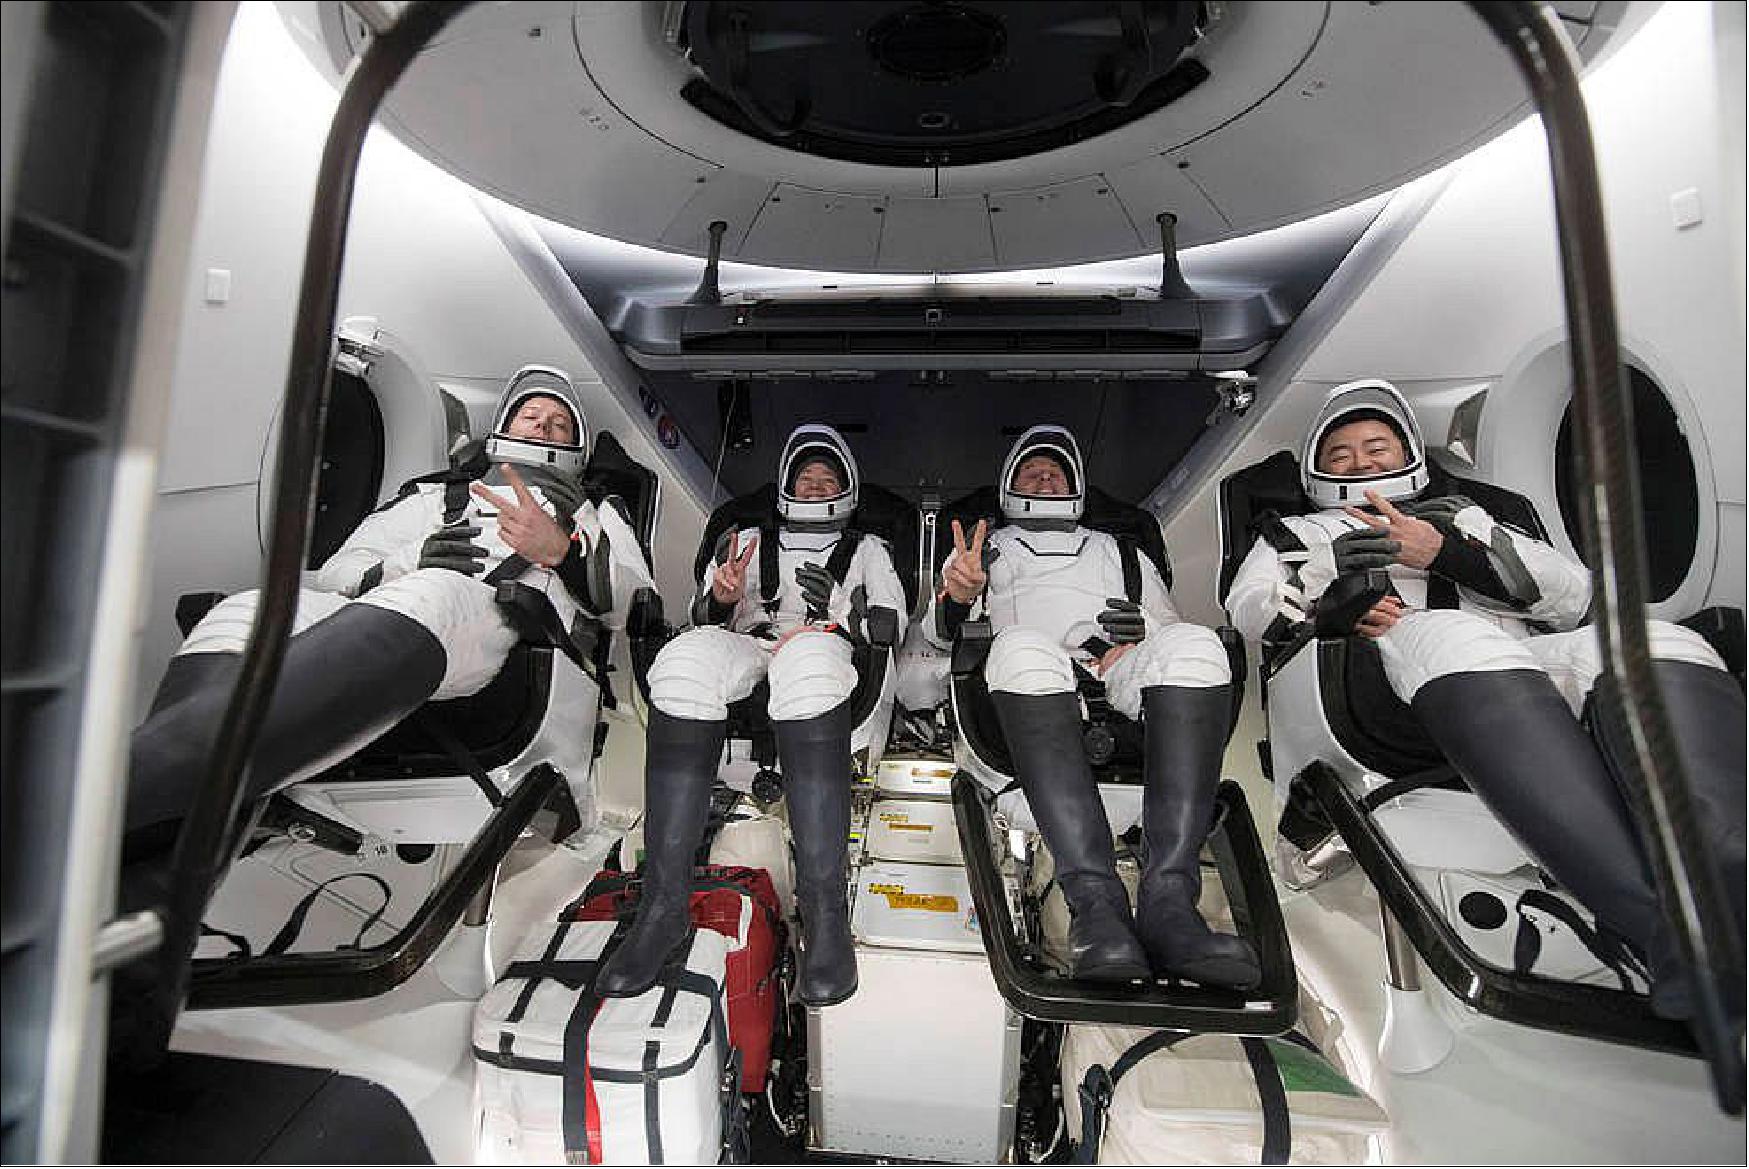 Figure 14: ESA (European Space Agency) astronaut Thomas Pesquet, left, NASA astronauts Megan McArthur and Shane Kimbrough, and Japan Aerospace Exploration Agency (JAXA) astronaut Aki Hoshide, right, are seen inside the SpaceX Crew Dragon Endeavour spacecraft onboard the SpaceX GO Navigator recovery ship shortly after having landed in the Gulf of Mexico off the coast of Pensacola, Florida, Monday, Nov. 8, 2021. NASA's SpaceX Crew-2 mission is the second operational mission of the SpaceX Crew Dragon spacecraft and Falcon 9 rocket to the International Space Station as part of the agency's Commercial Crew Program (image credits: NASA/Aubrey Gemignani)